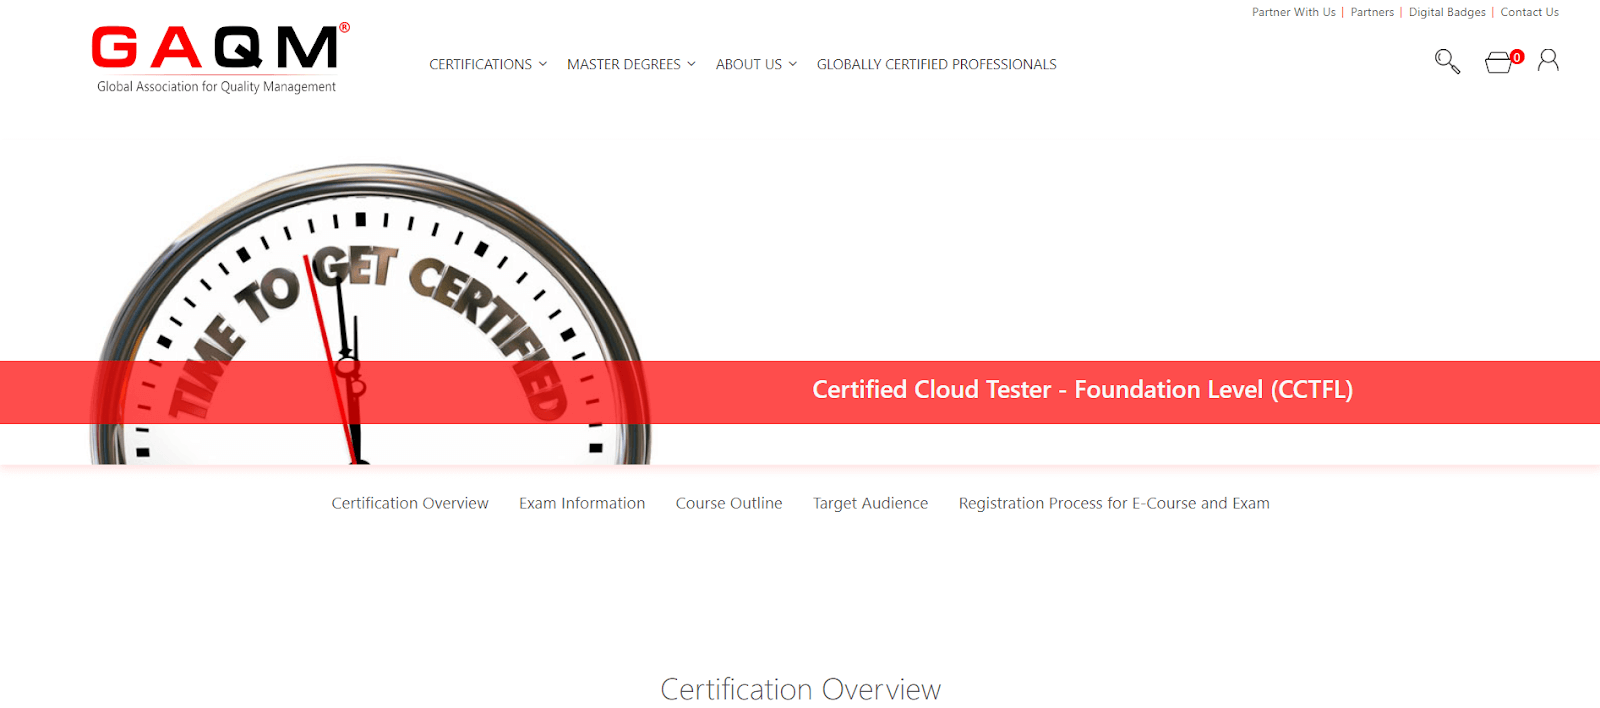  Certified Cloud Tester (Foundational Level)